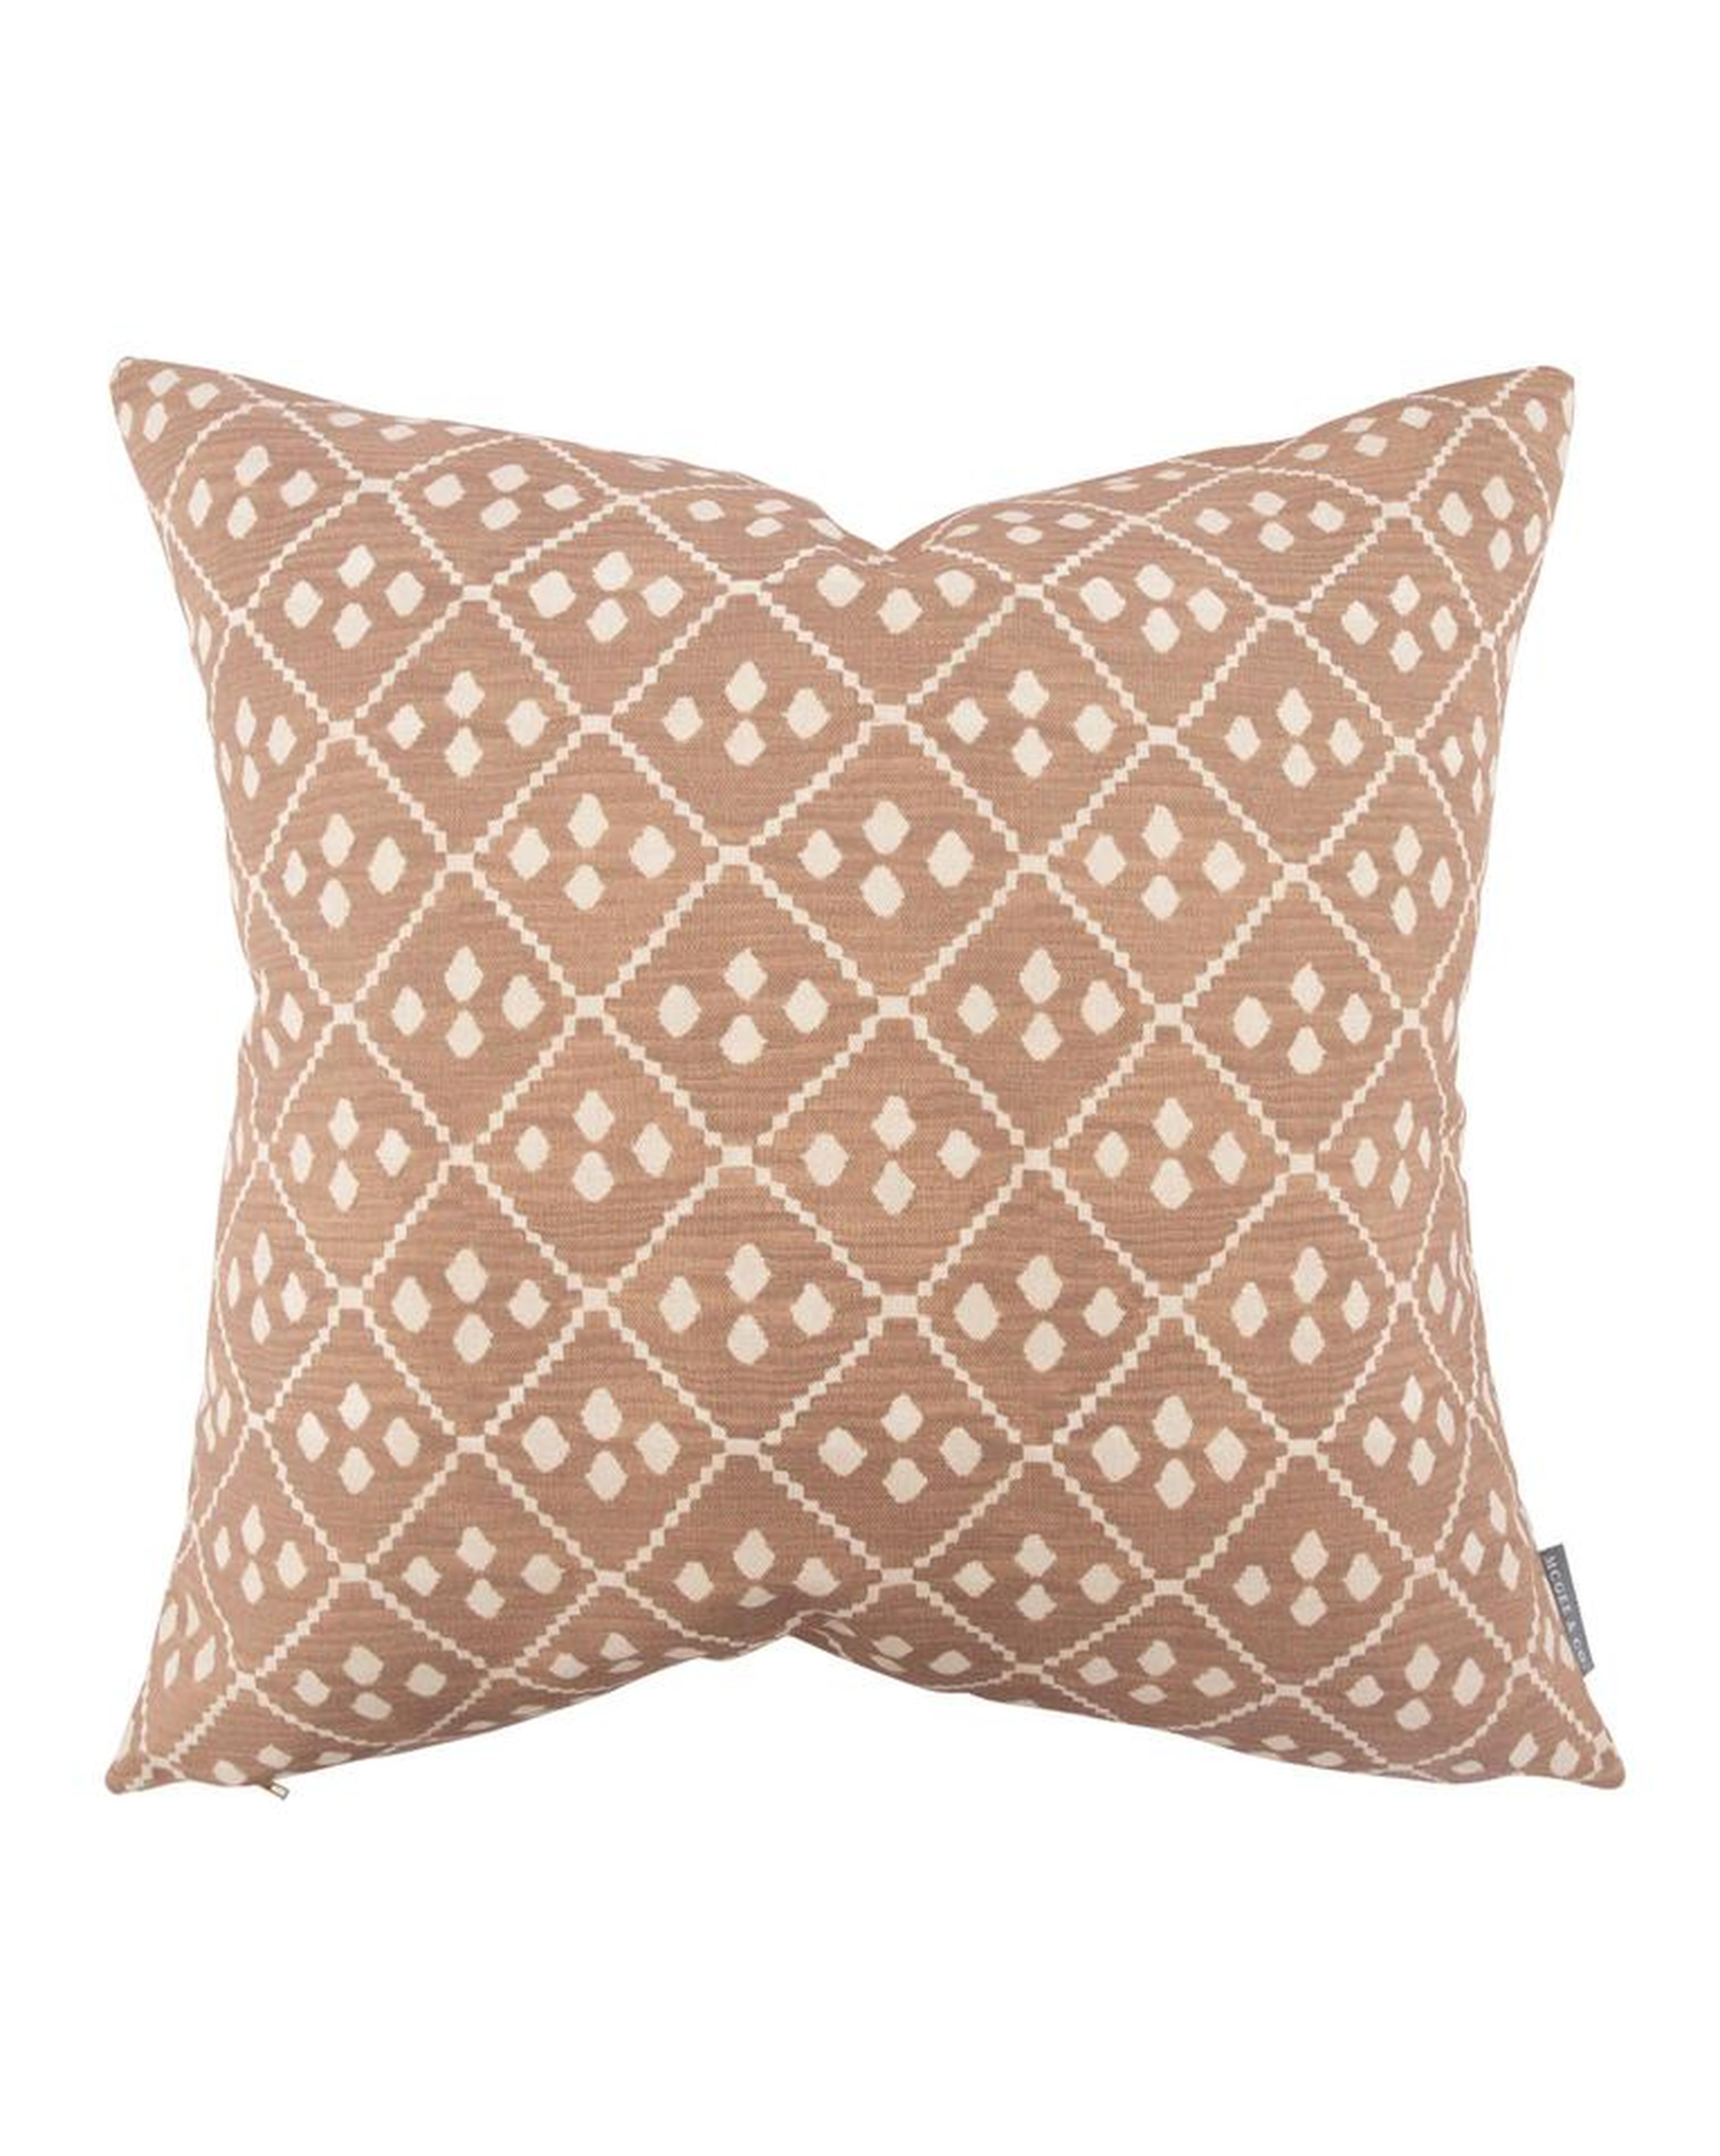 WARWICK DIAMOND PILLOW COVER WITHOUT INSERT, 22" x 22" - McGee & Co.